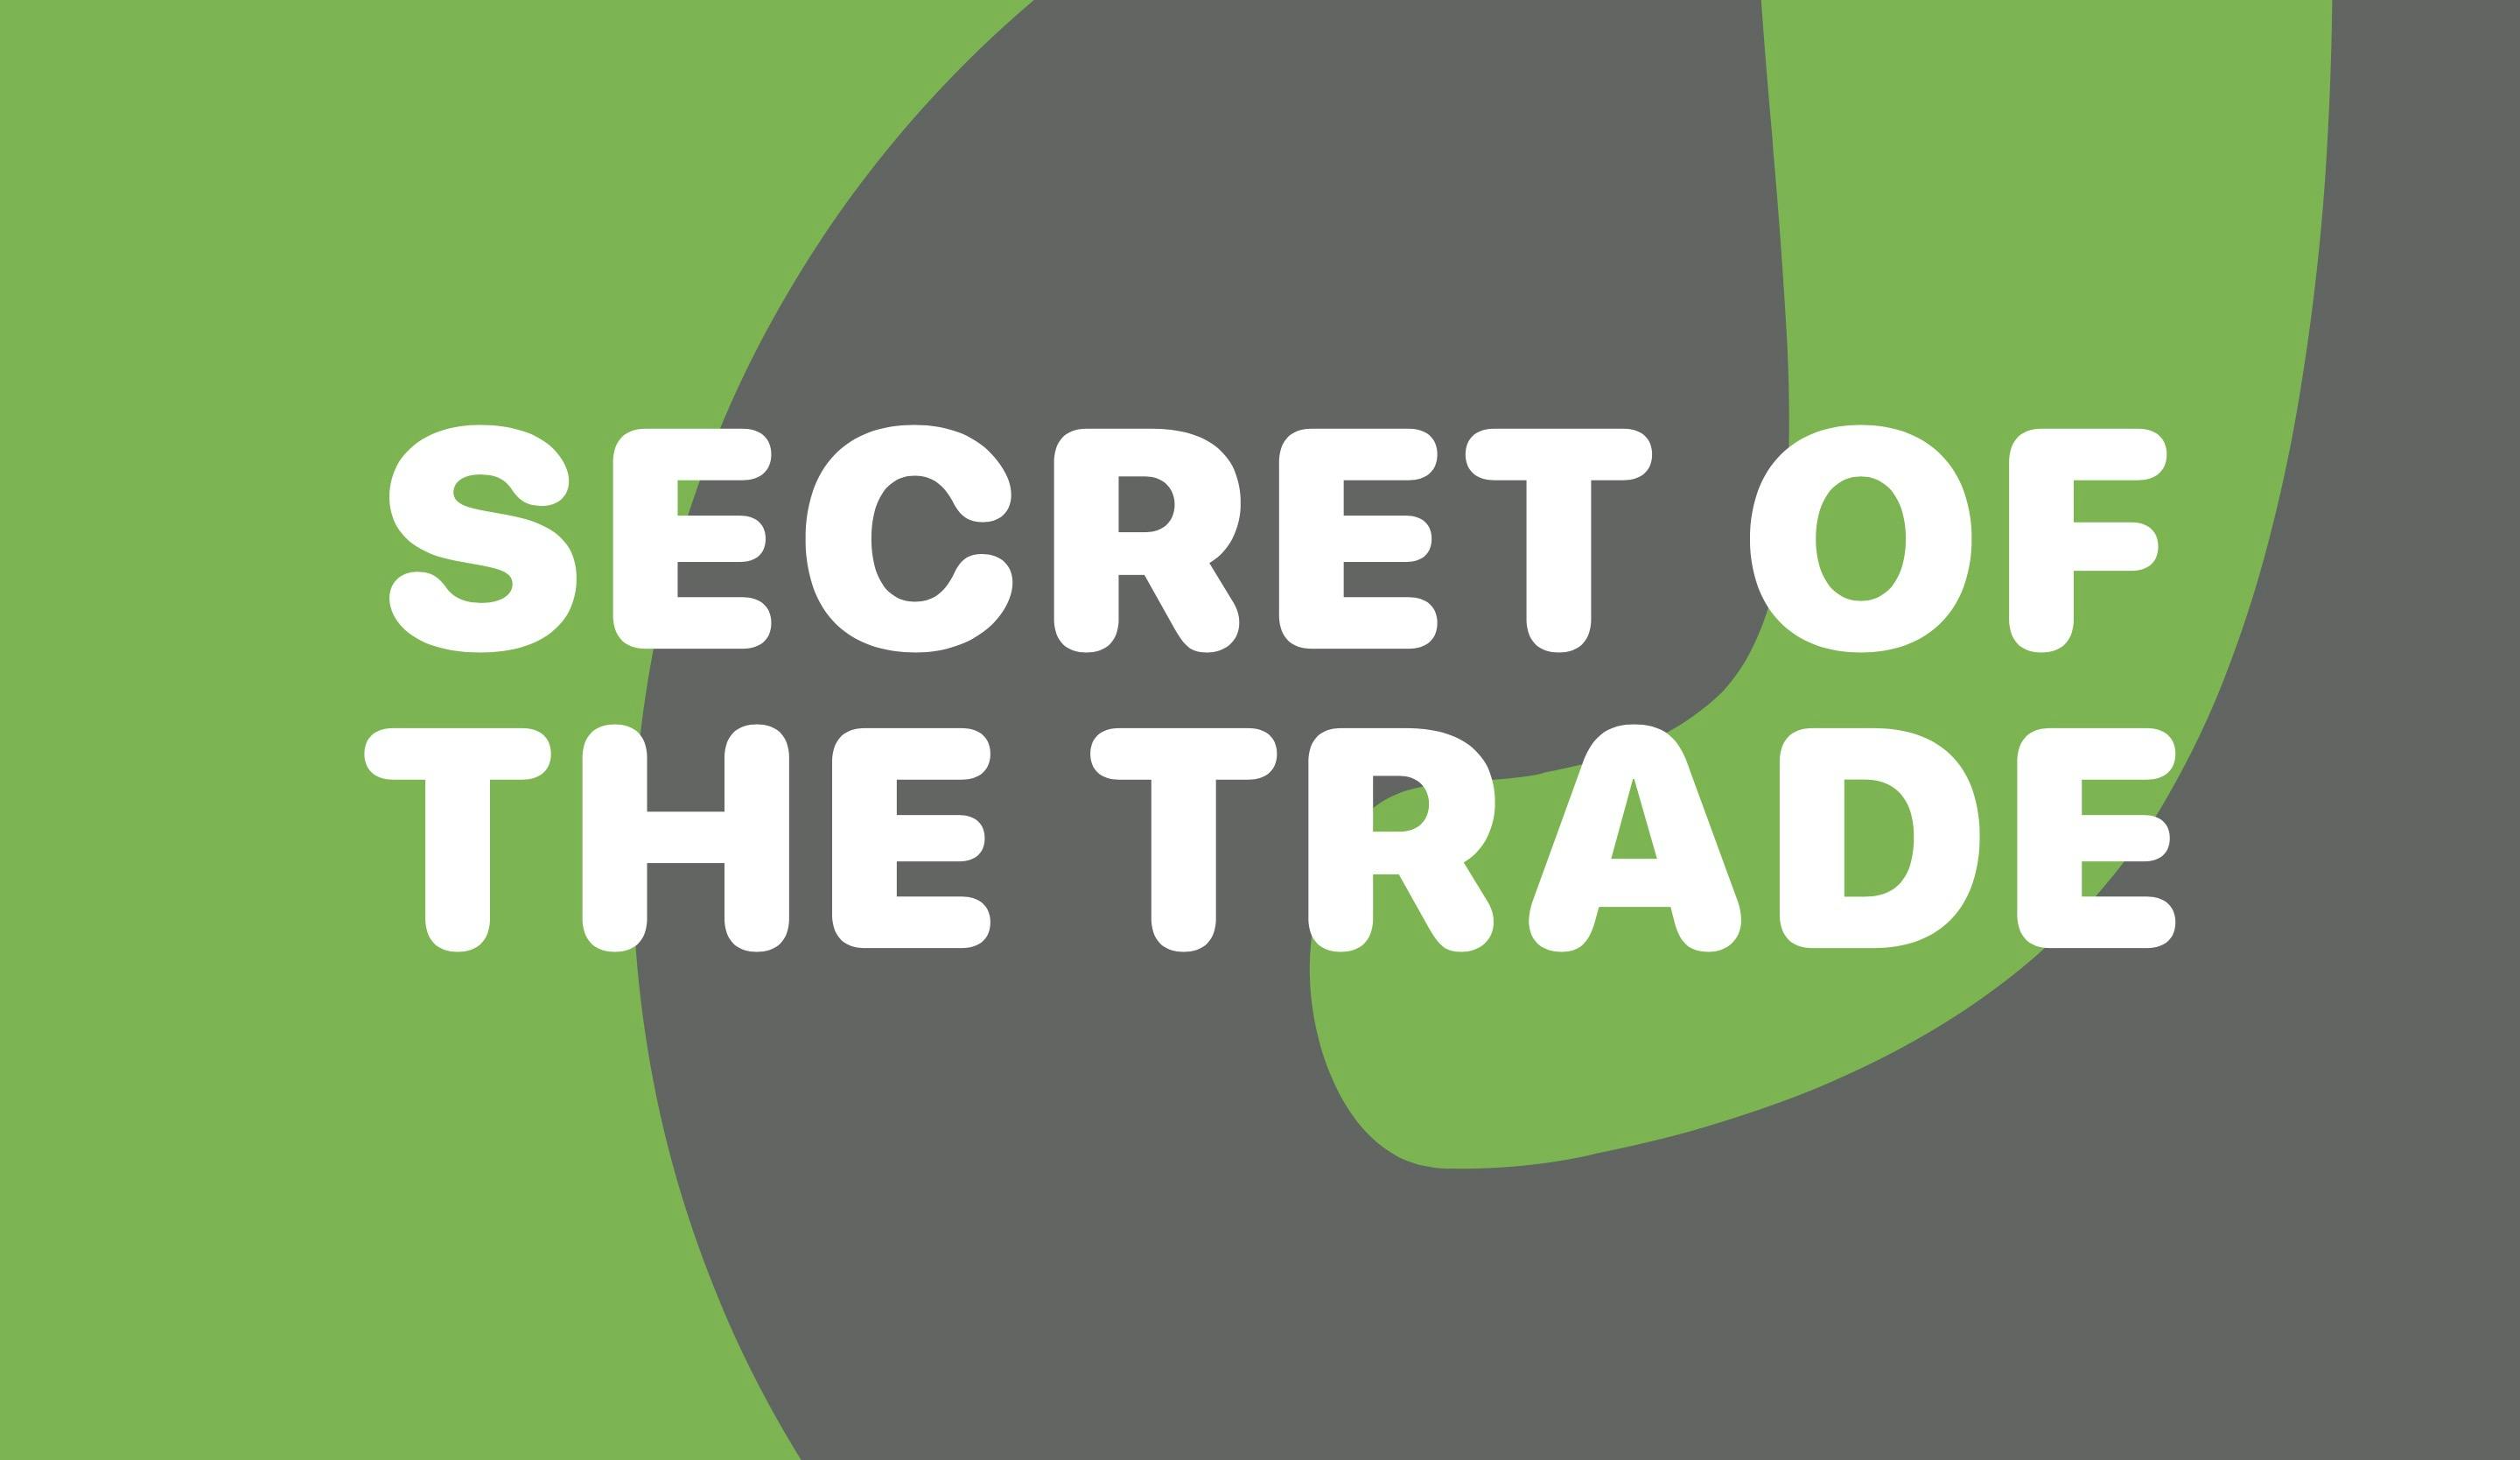 Words: Secret Of The Trade.